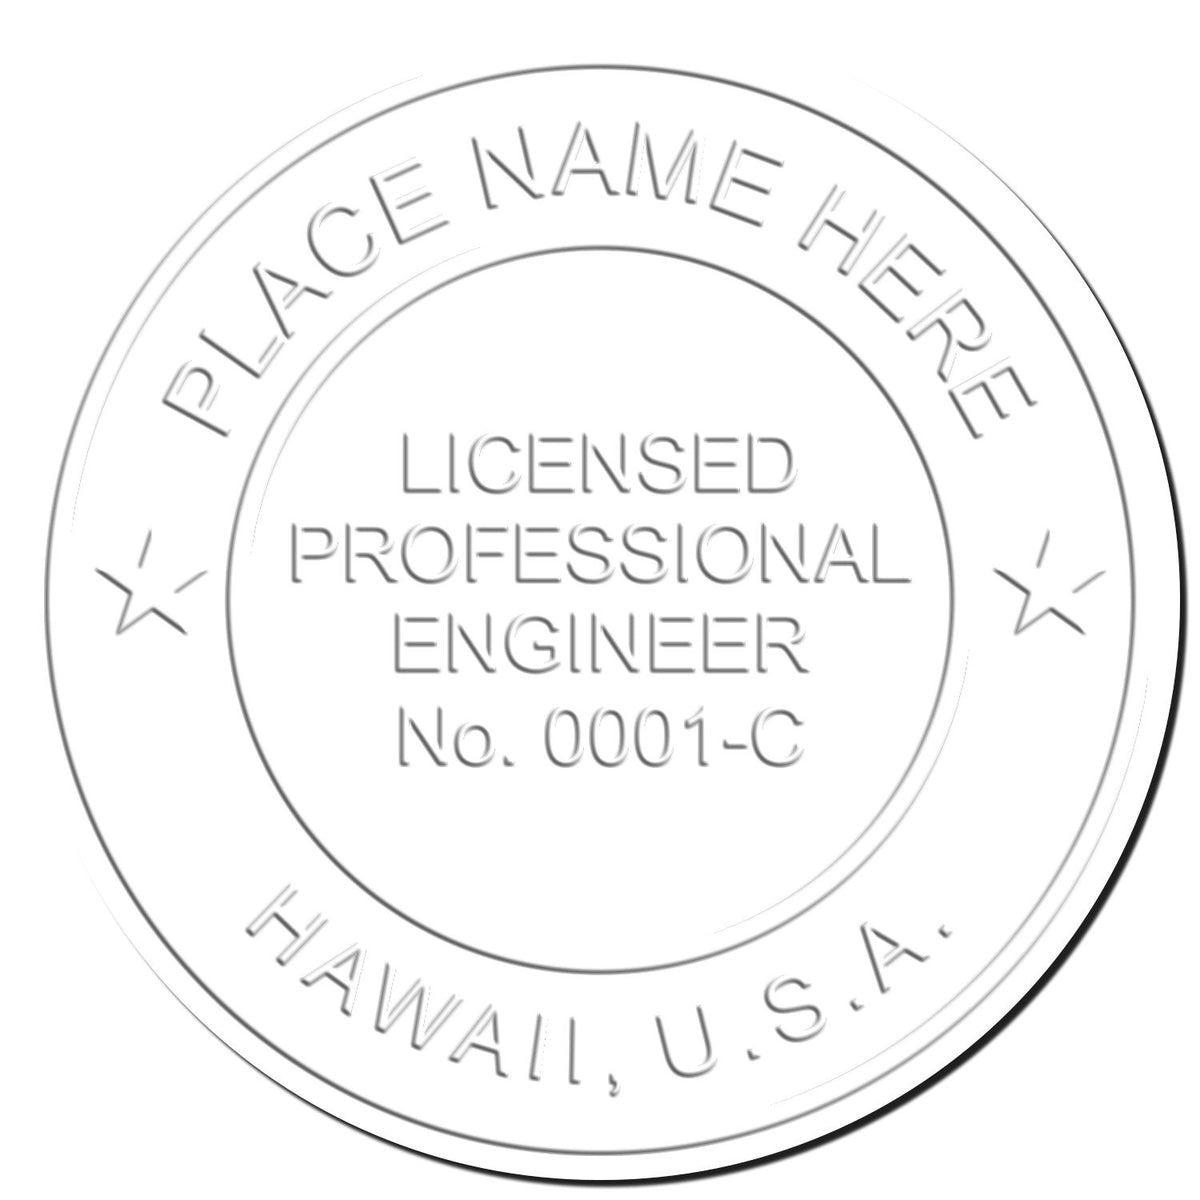 The Soft Hawaii Professional Engineer Seal stamp impression comes to life with a crisp, detailed photo on paper - showcasing true professional quality.